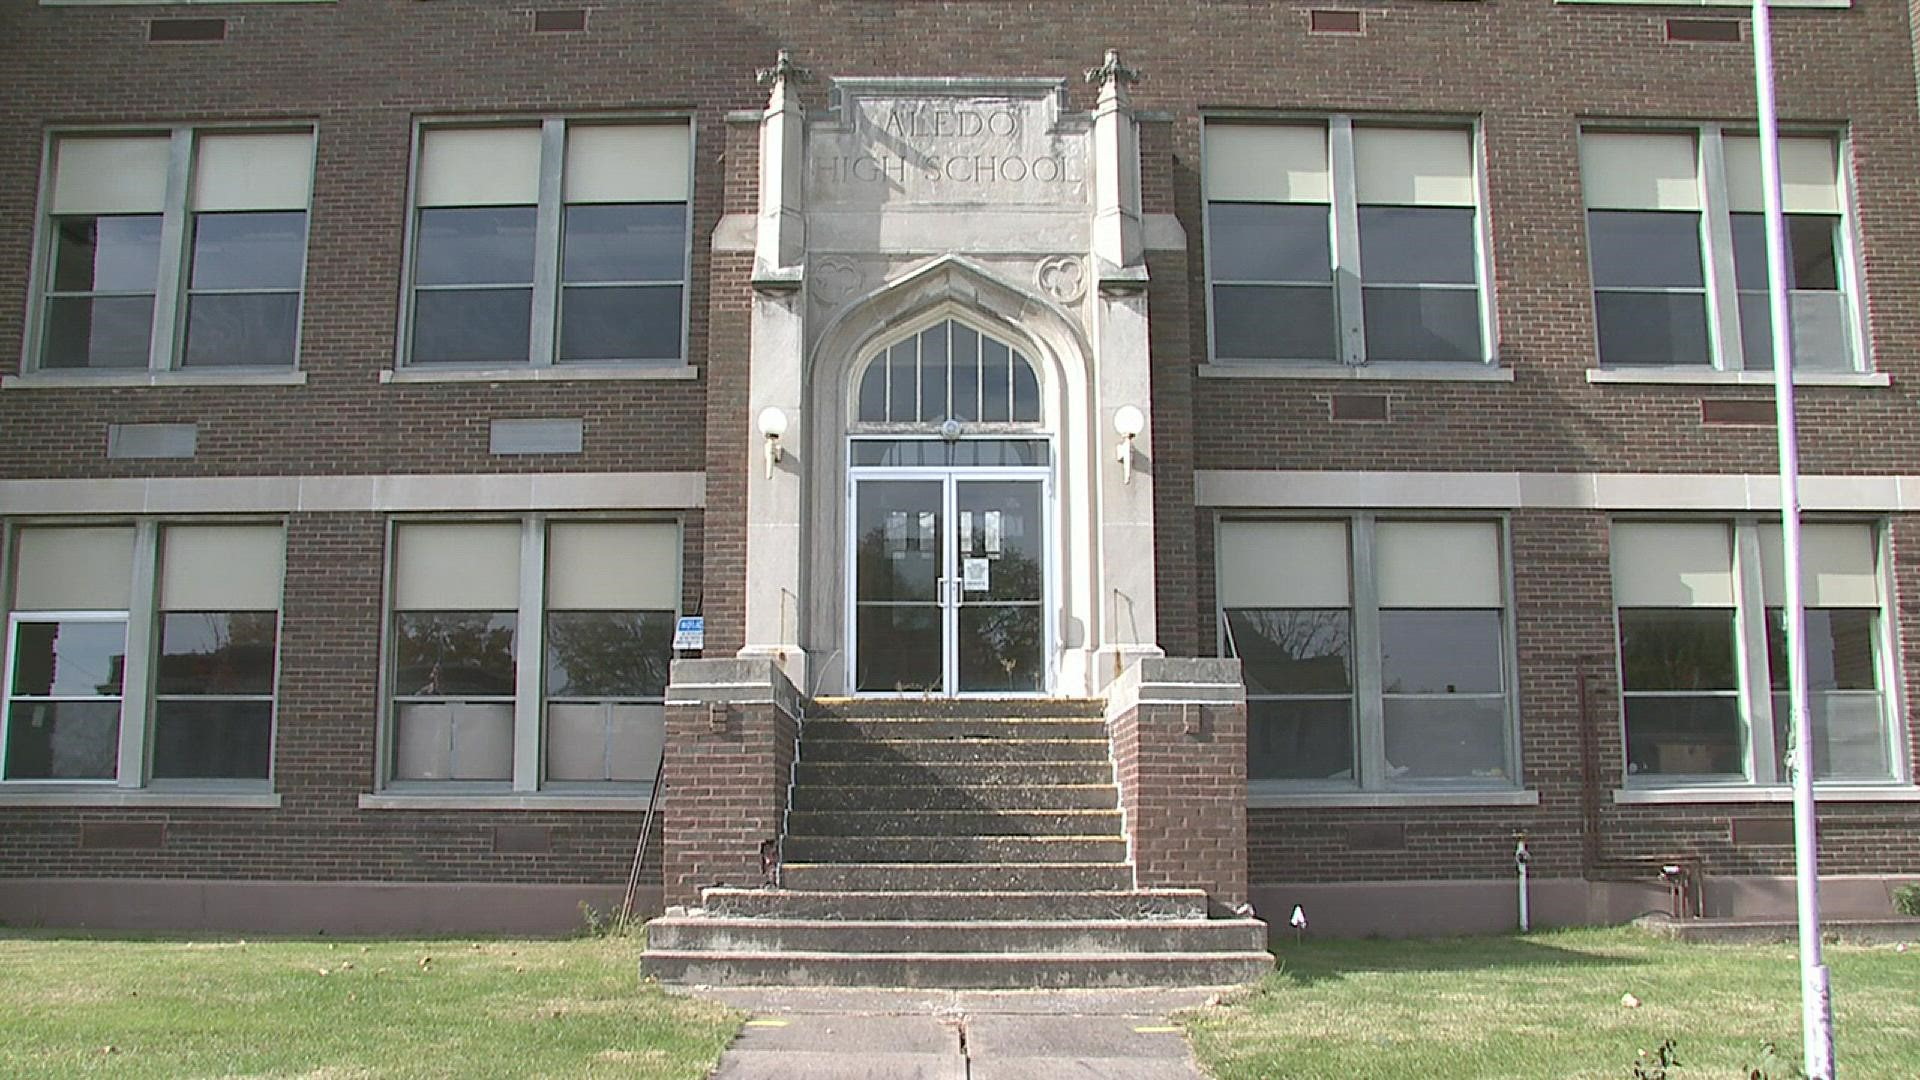 The building has sat vacant for the last 20 years and plans will now bring 30 apartments to the former Junior High School